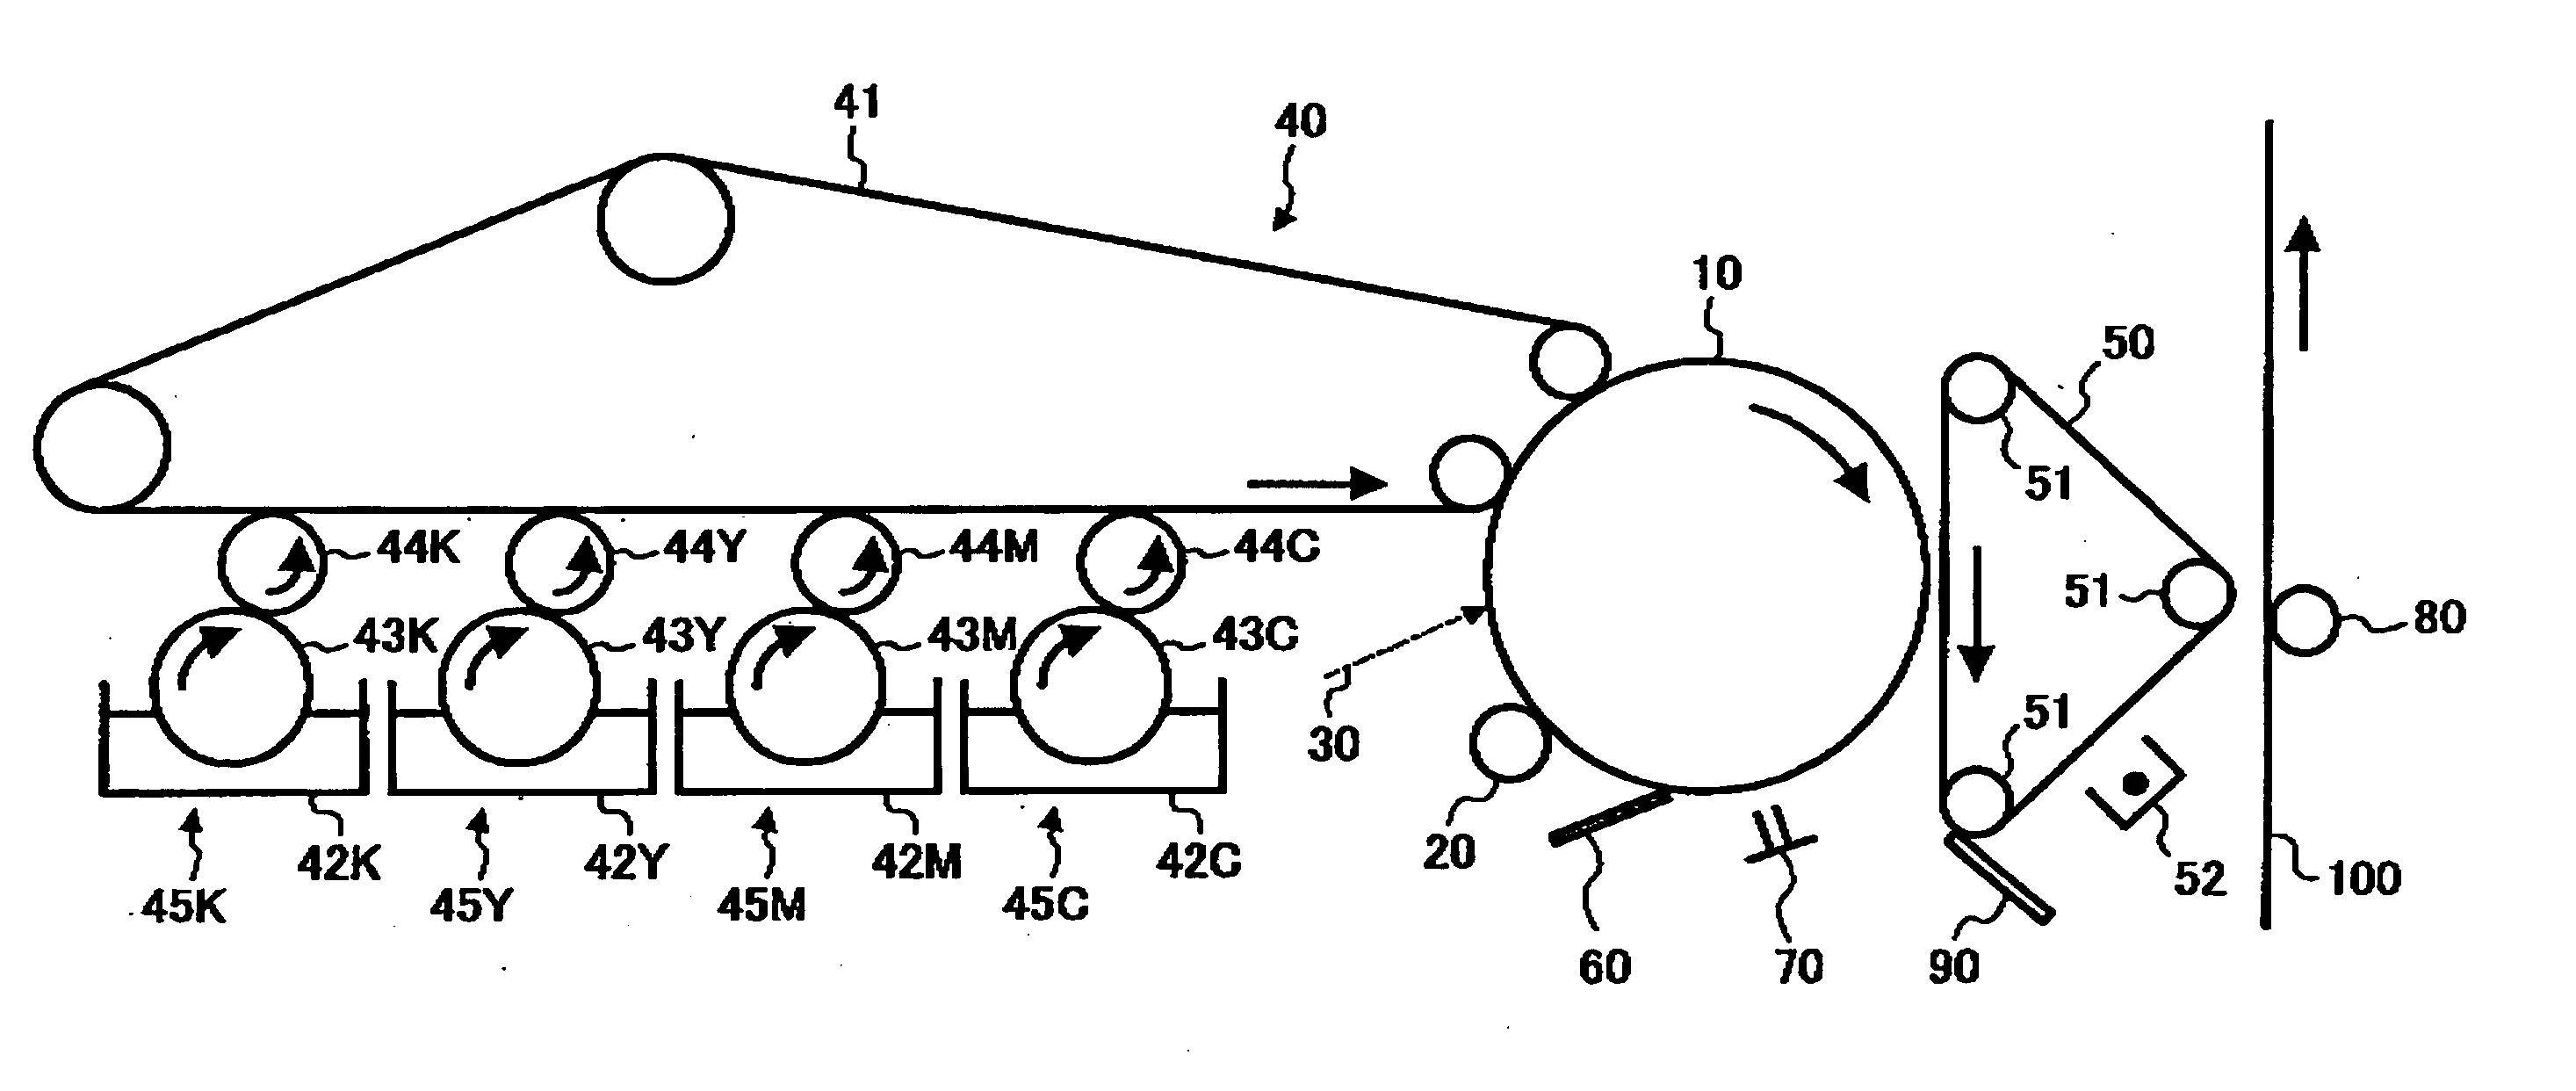 Toner, developer, image forming apparatus and image forming method